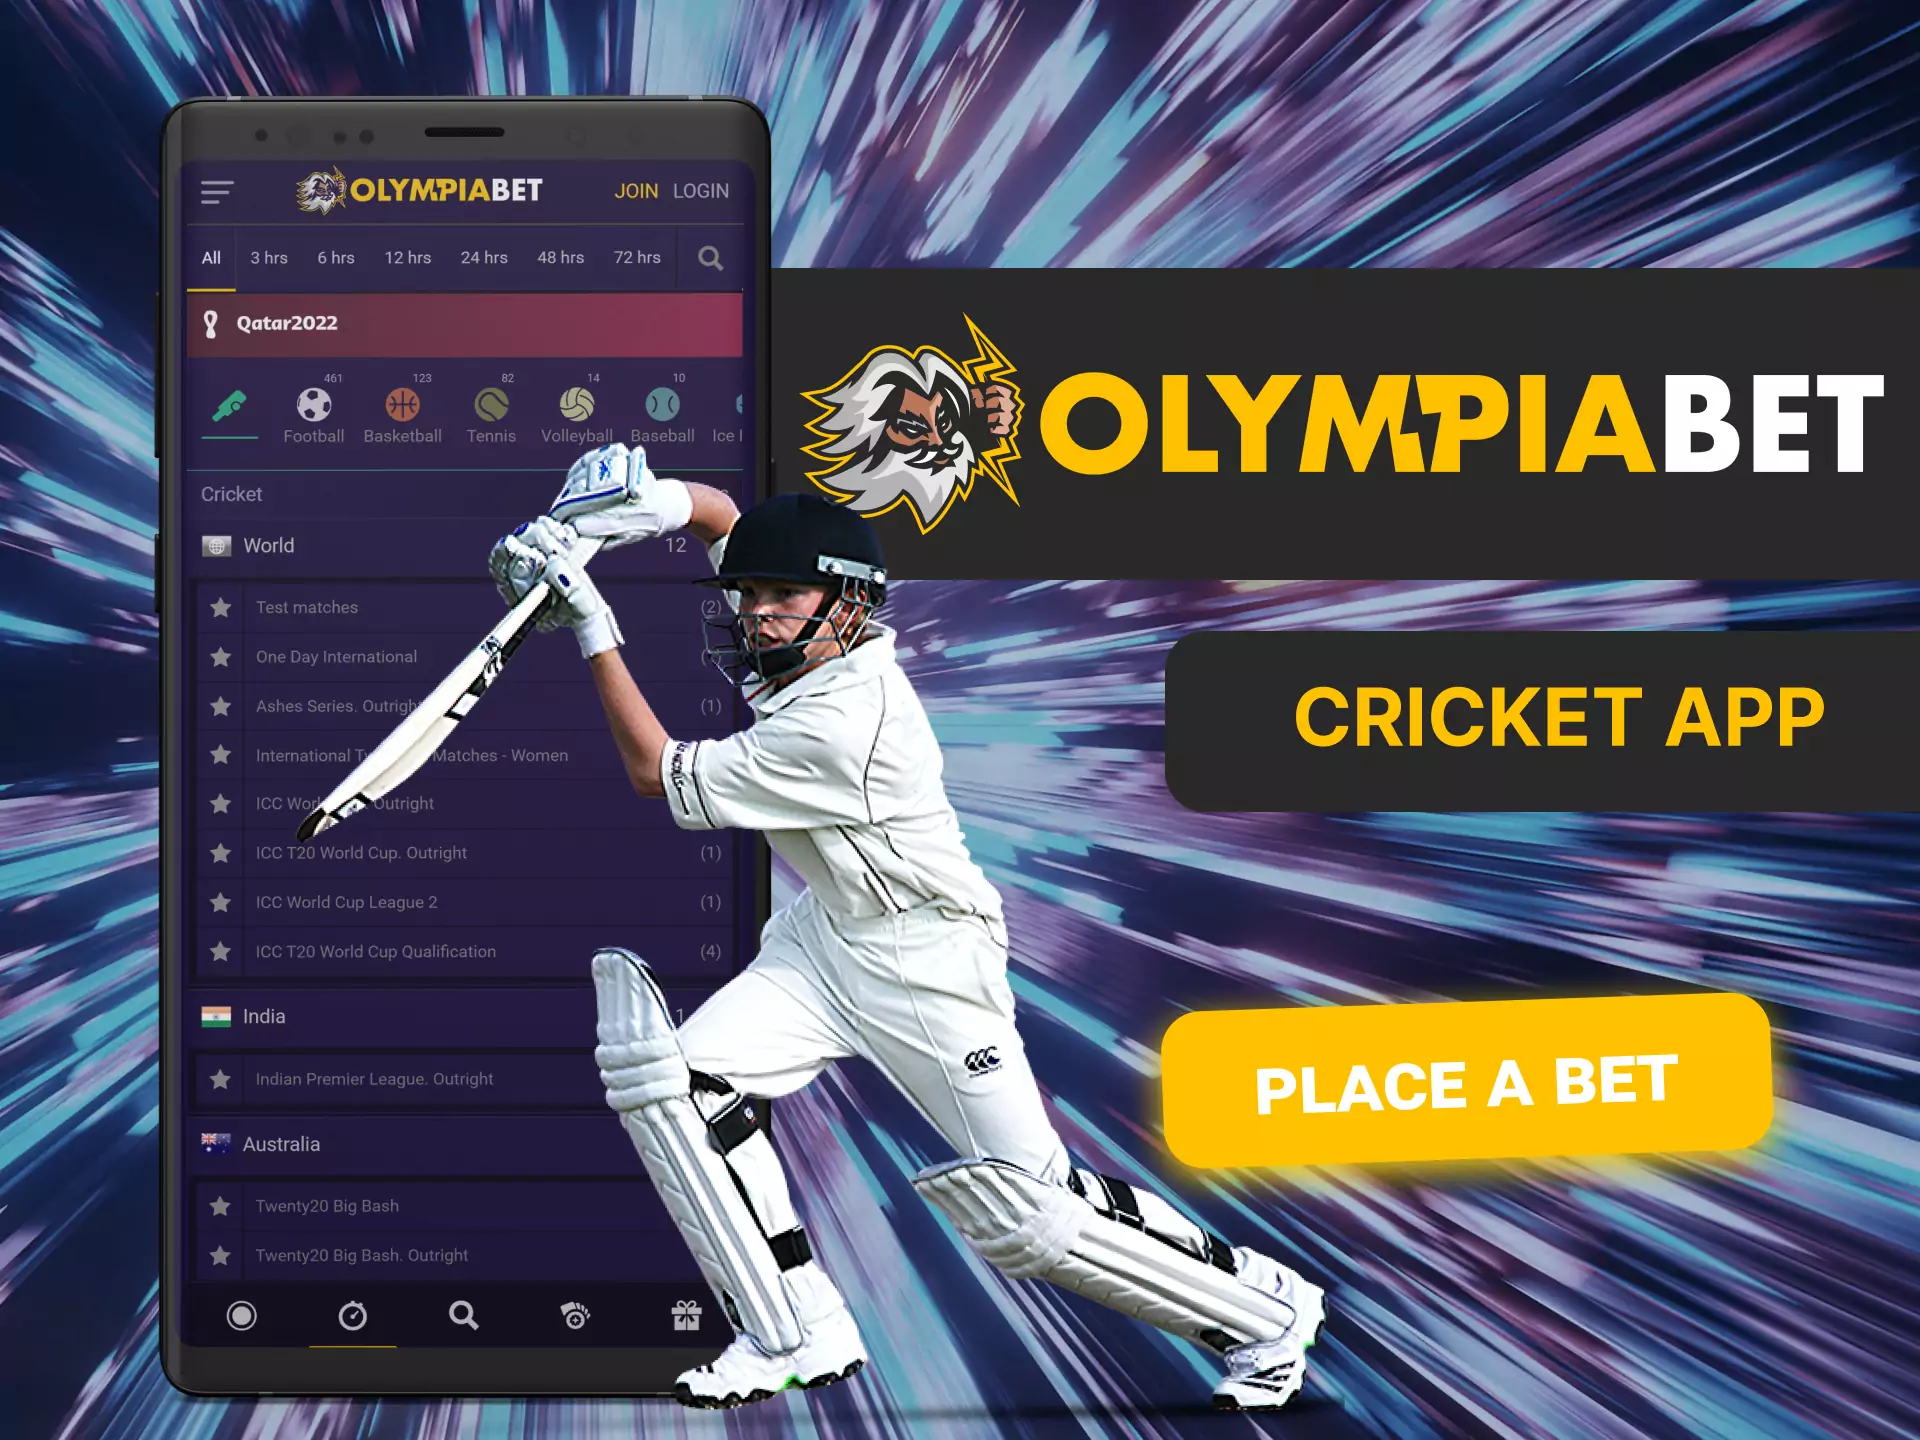 Place a cricket bet in OlympiaBet on your favorite team.